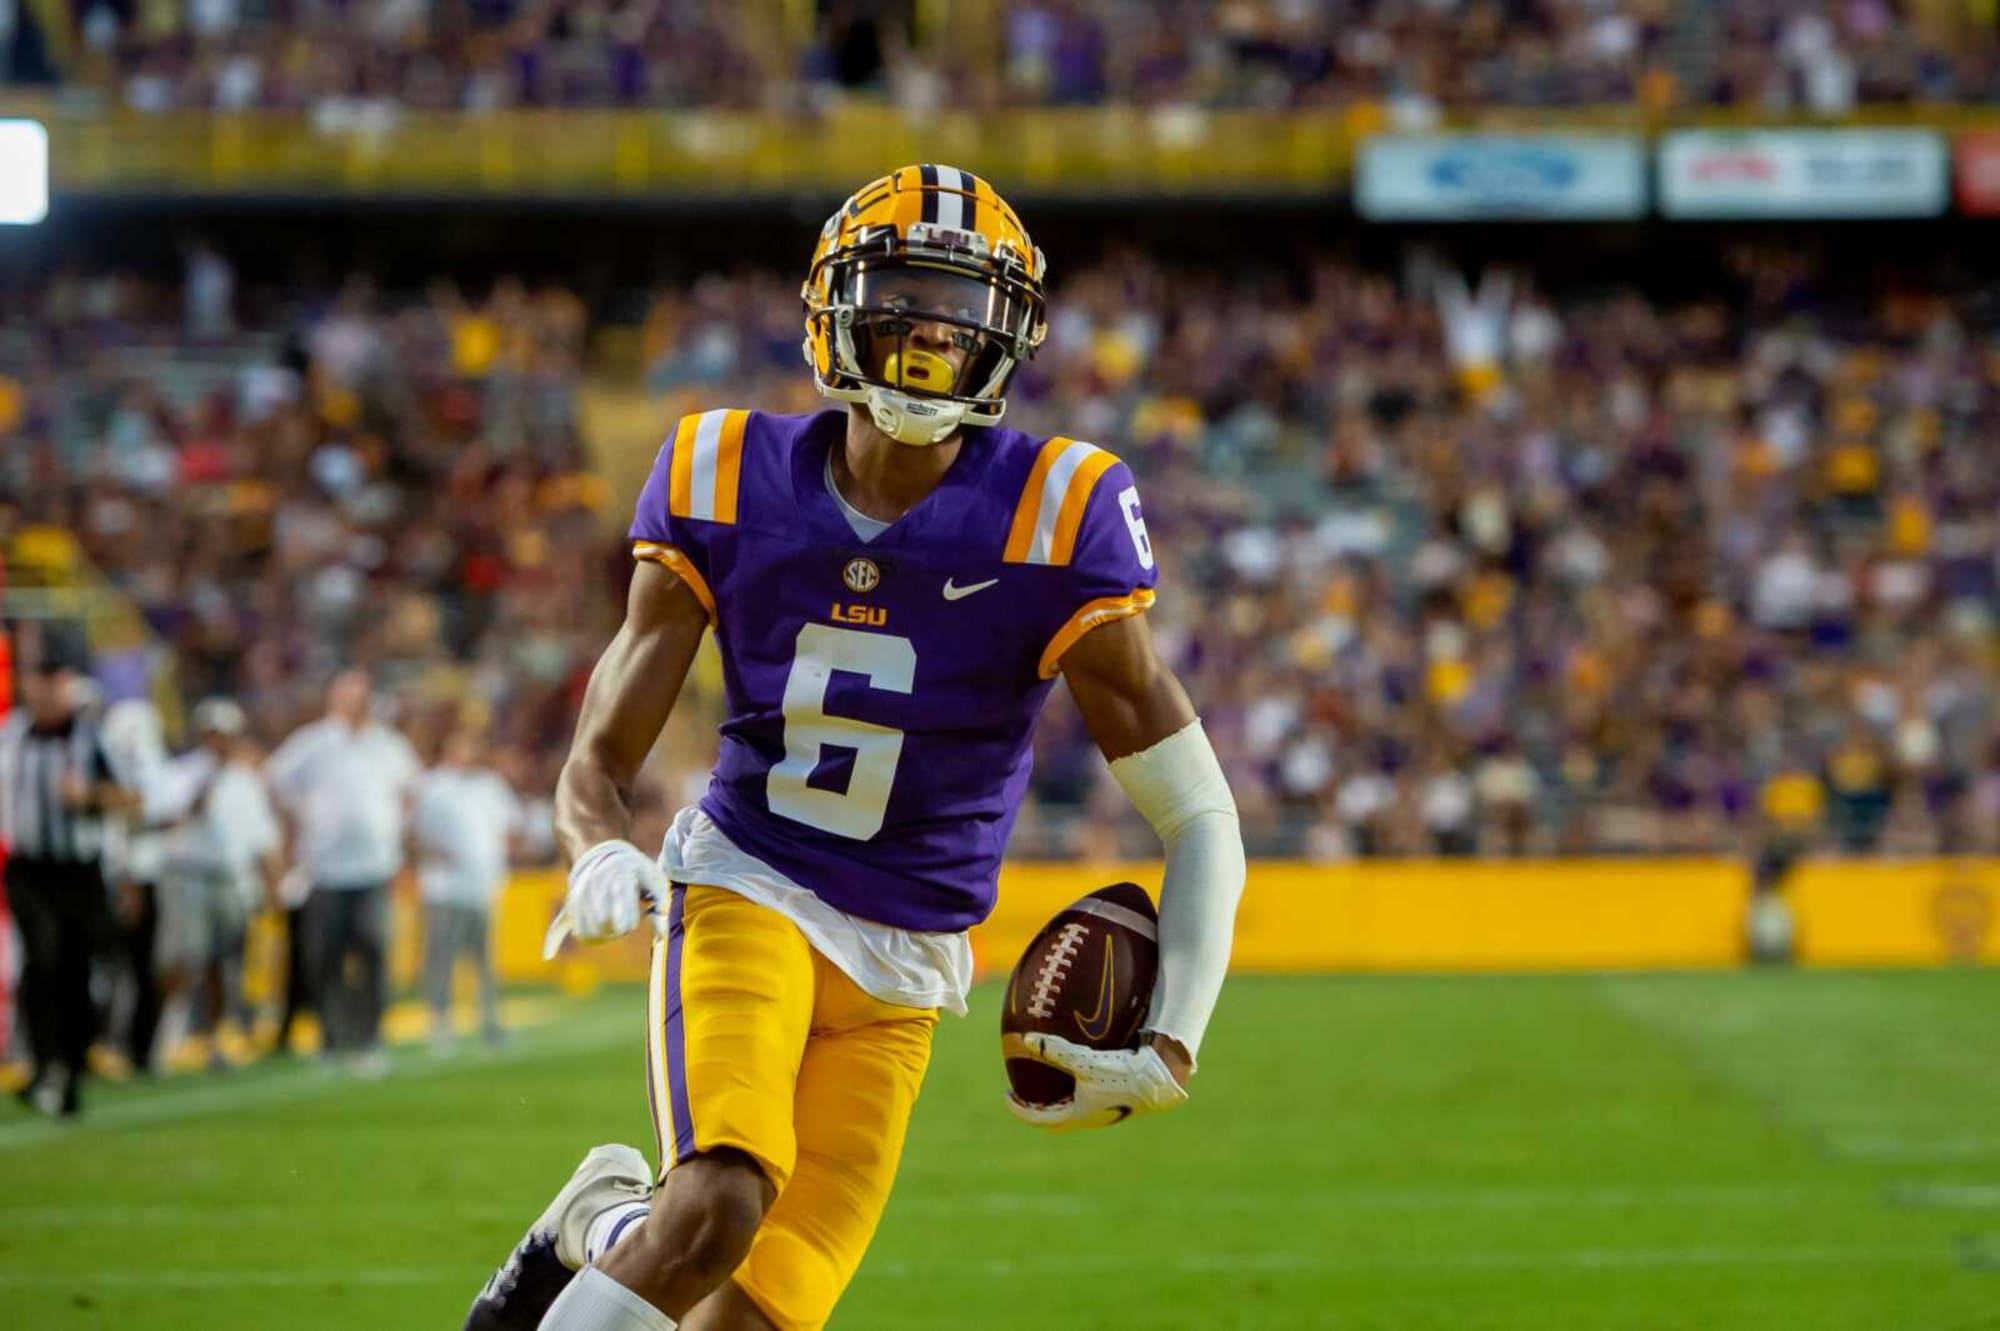 LSU Game Today LSU vs Auburn injury report, schedule, live Stream, TV channel and betting preview for Week 5 college football game